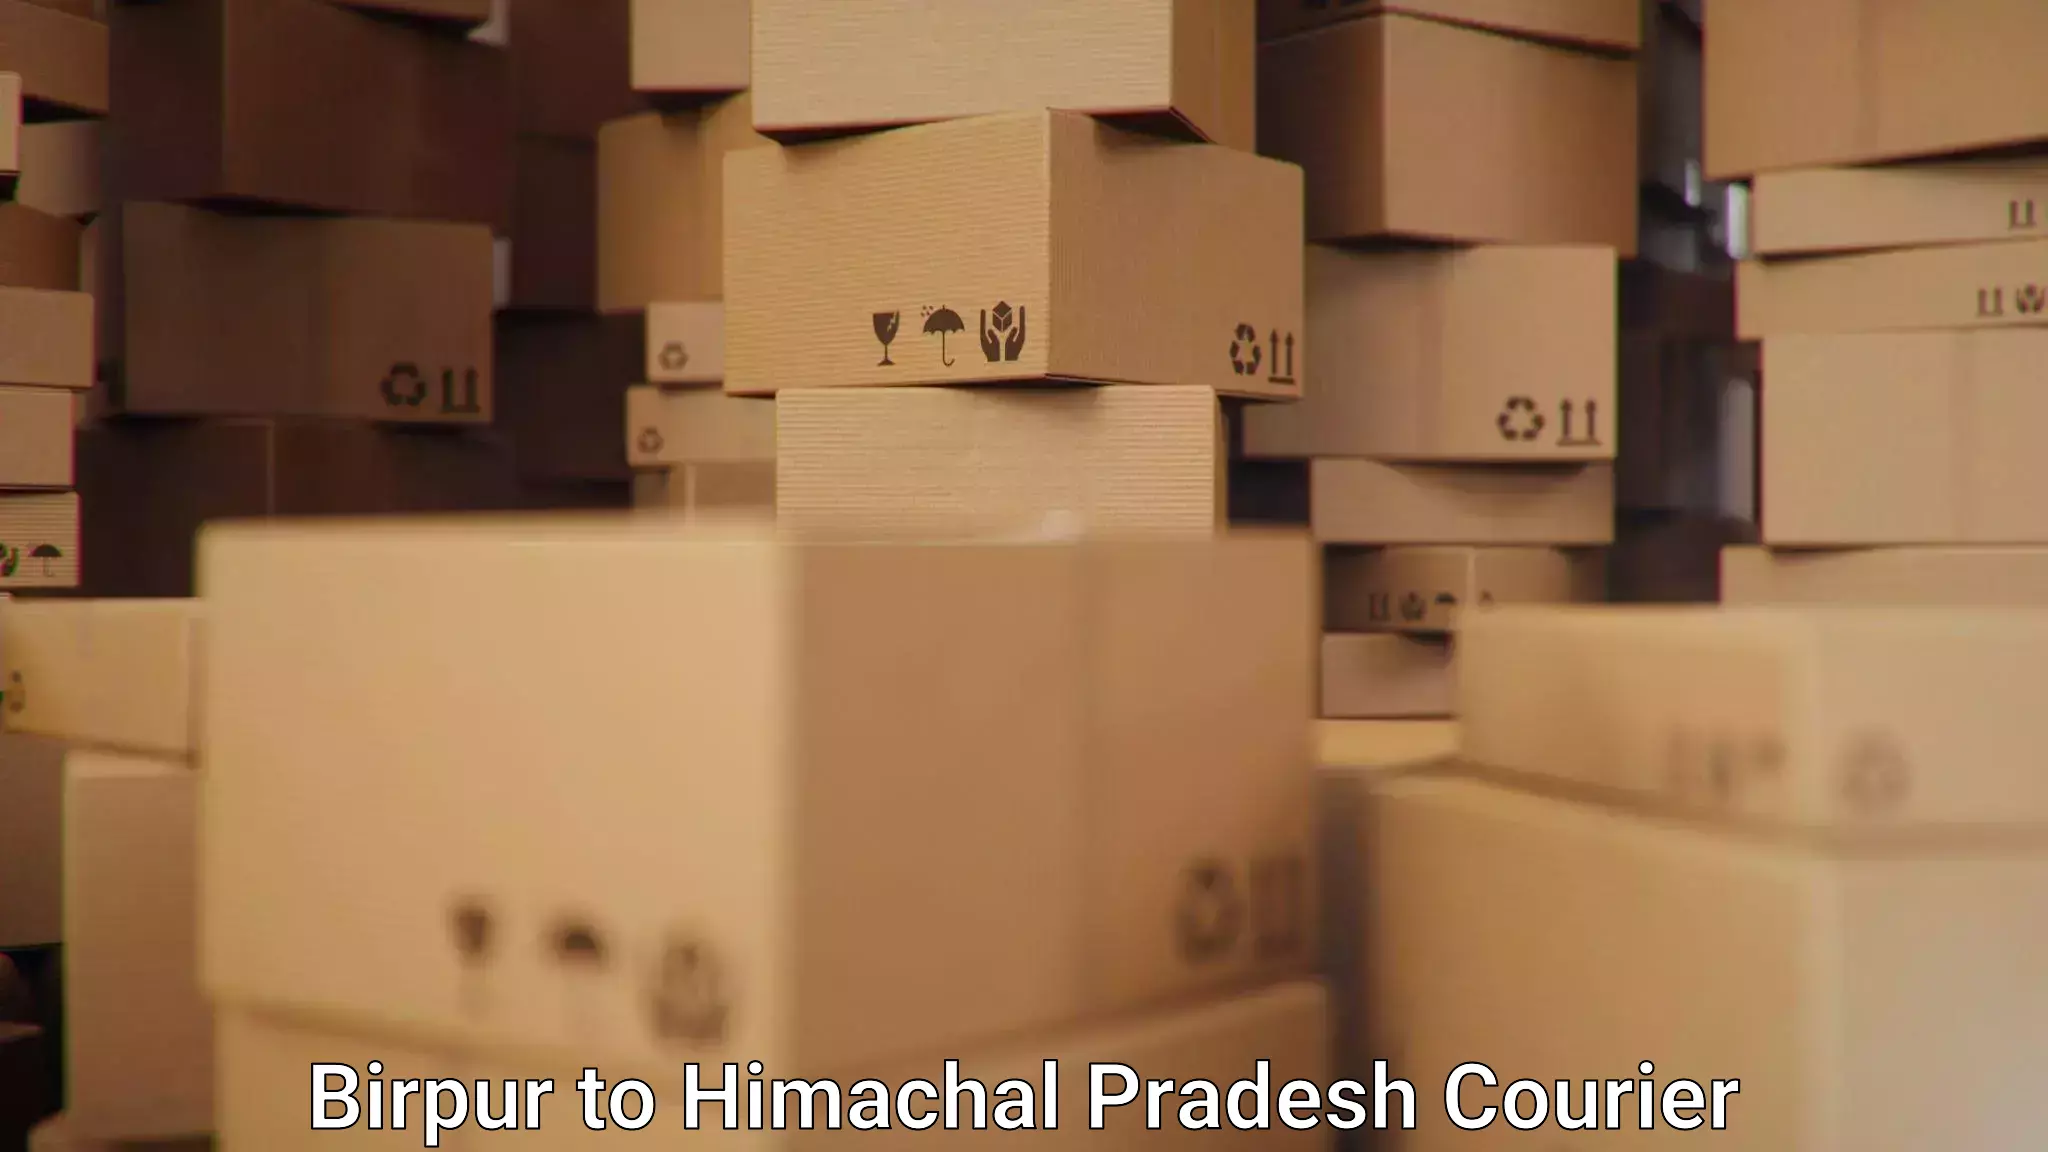 Personal courier services Birpur to Himachal Pradesh